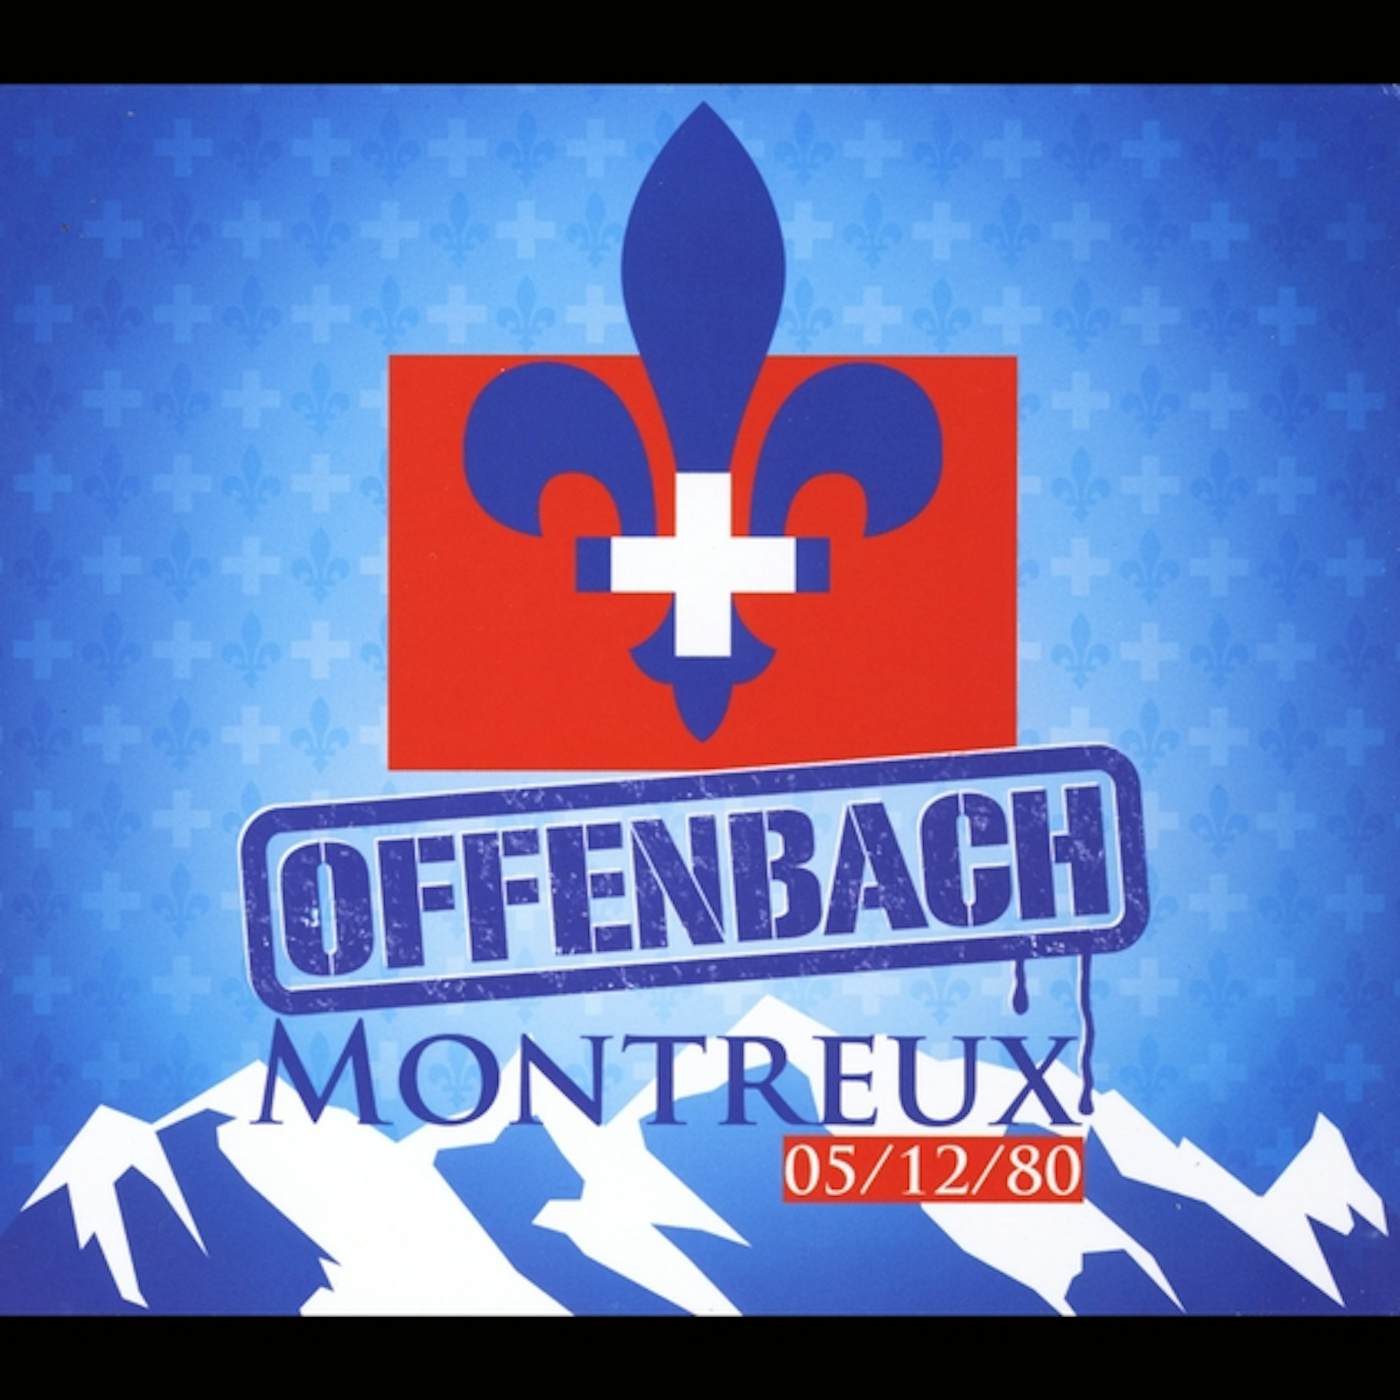 Offenbach MONTREUX 05/12/80 CD